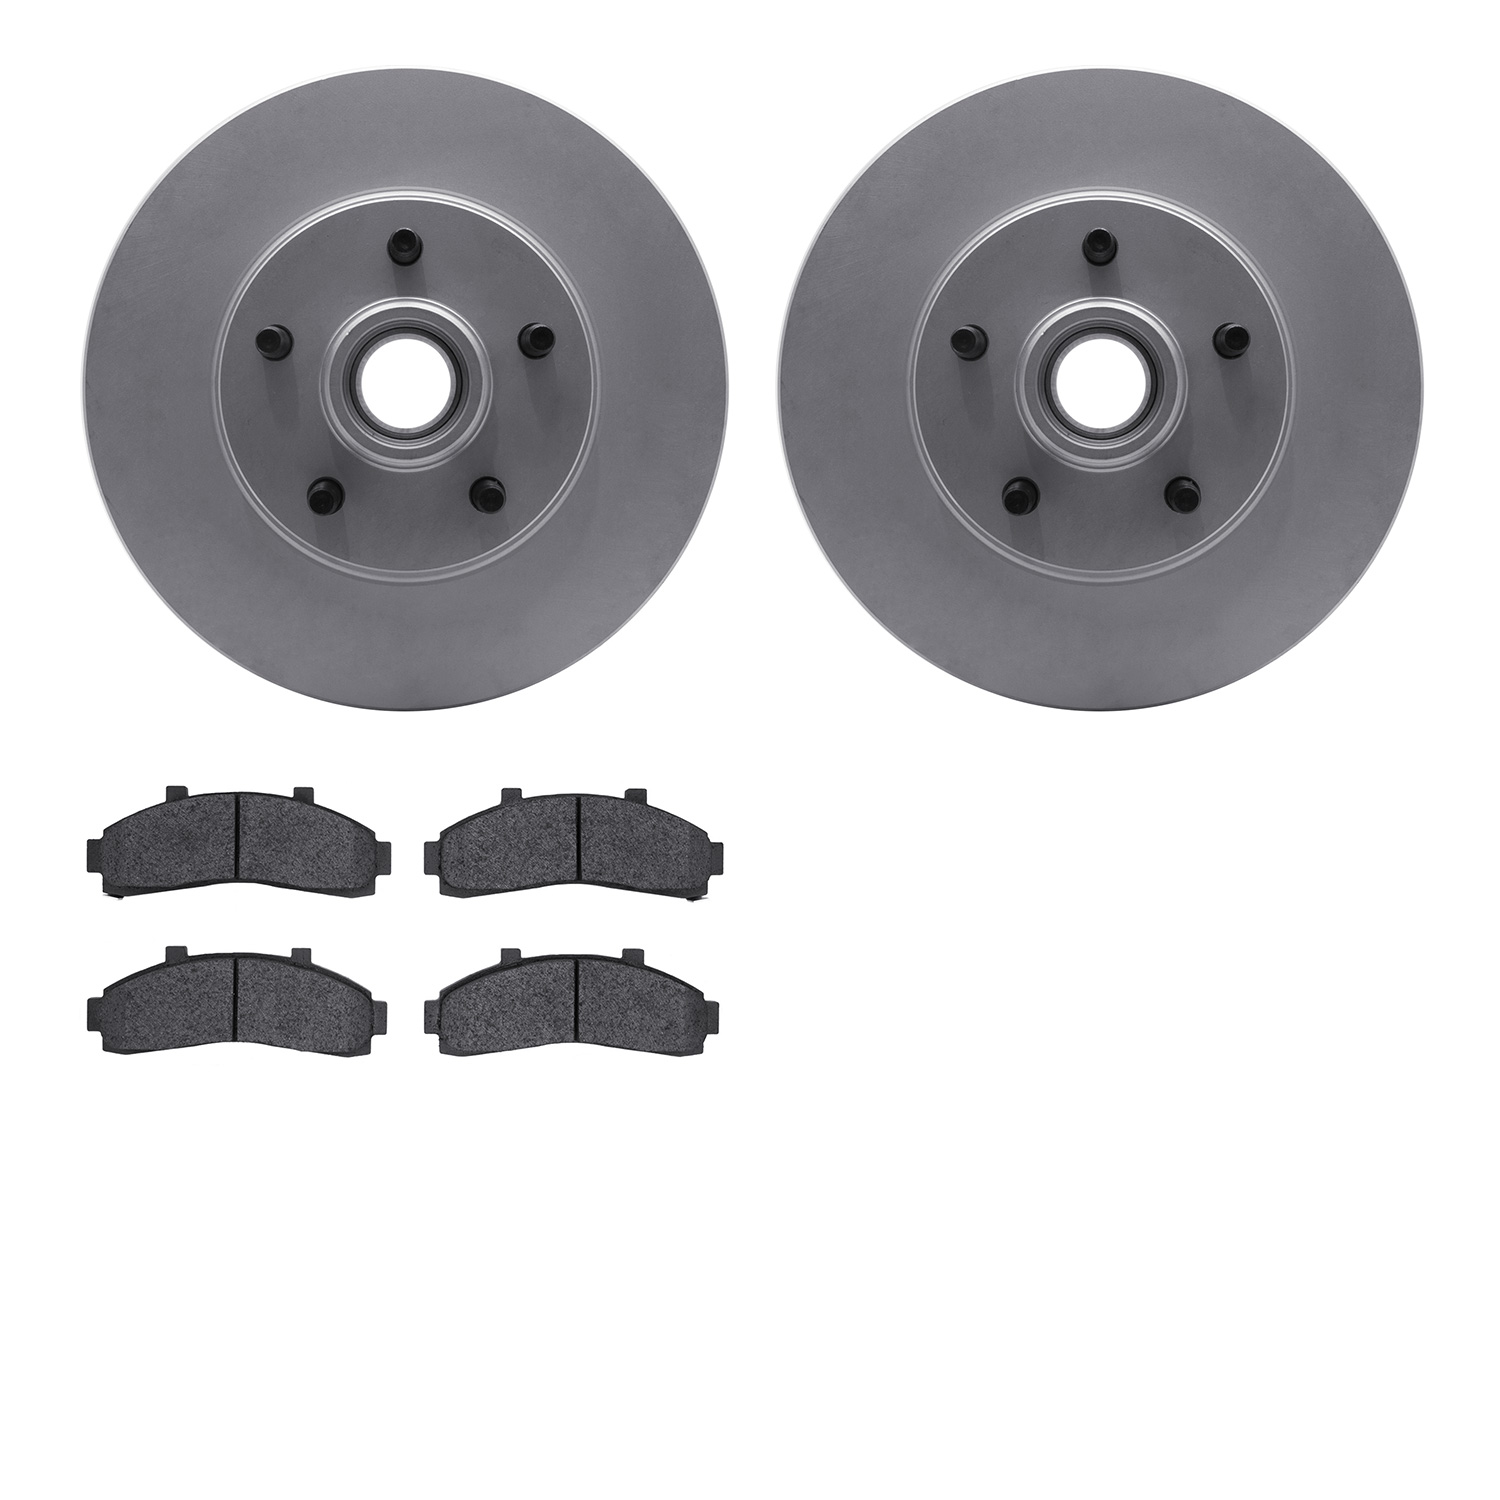 4402-54012 Geospec Brake Rotors with Ultimate-Duty Brake Pads Kit, 1995-2002 Ford/Lincoln/Mercury/Mazda, Position: Front